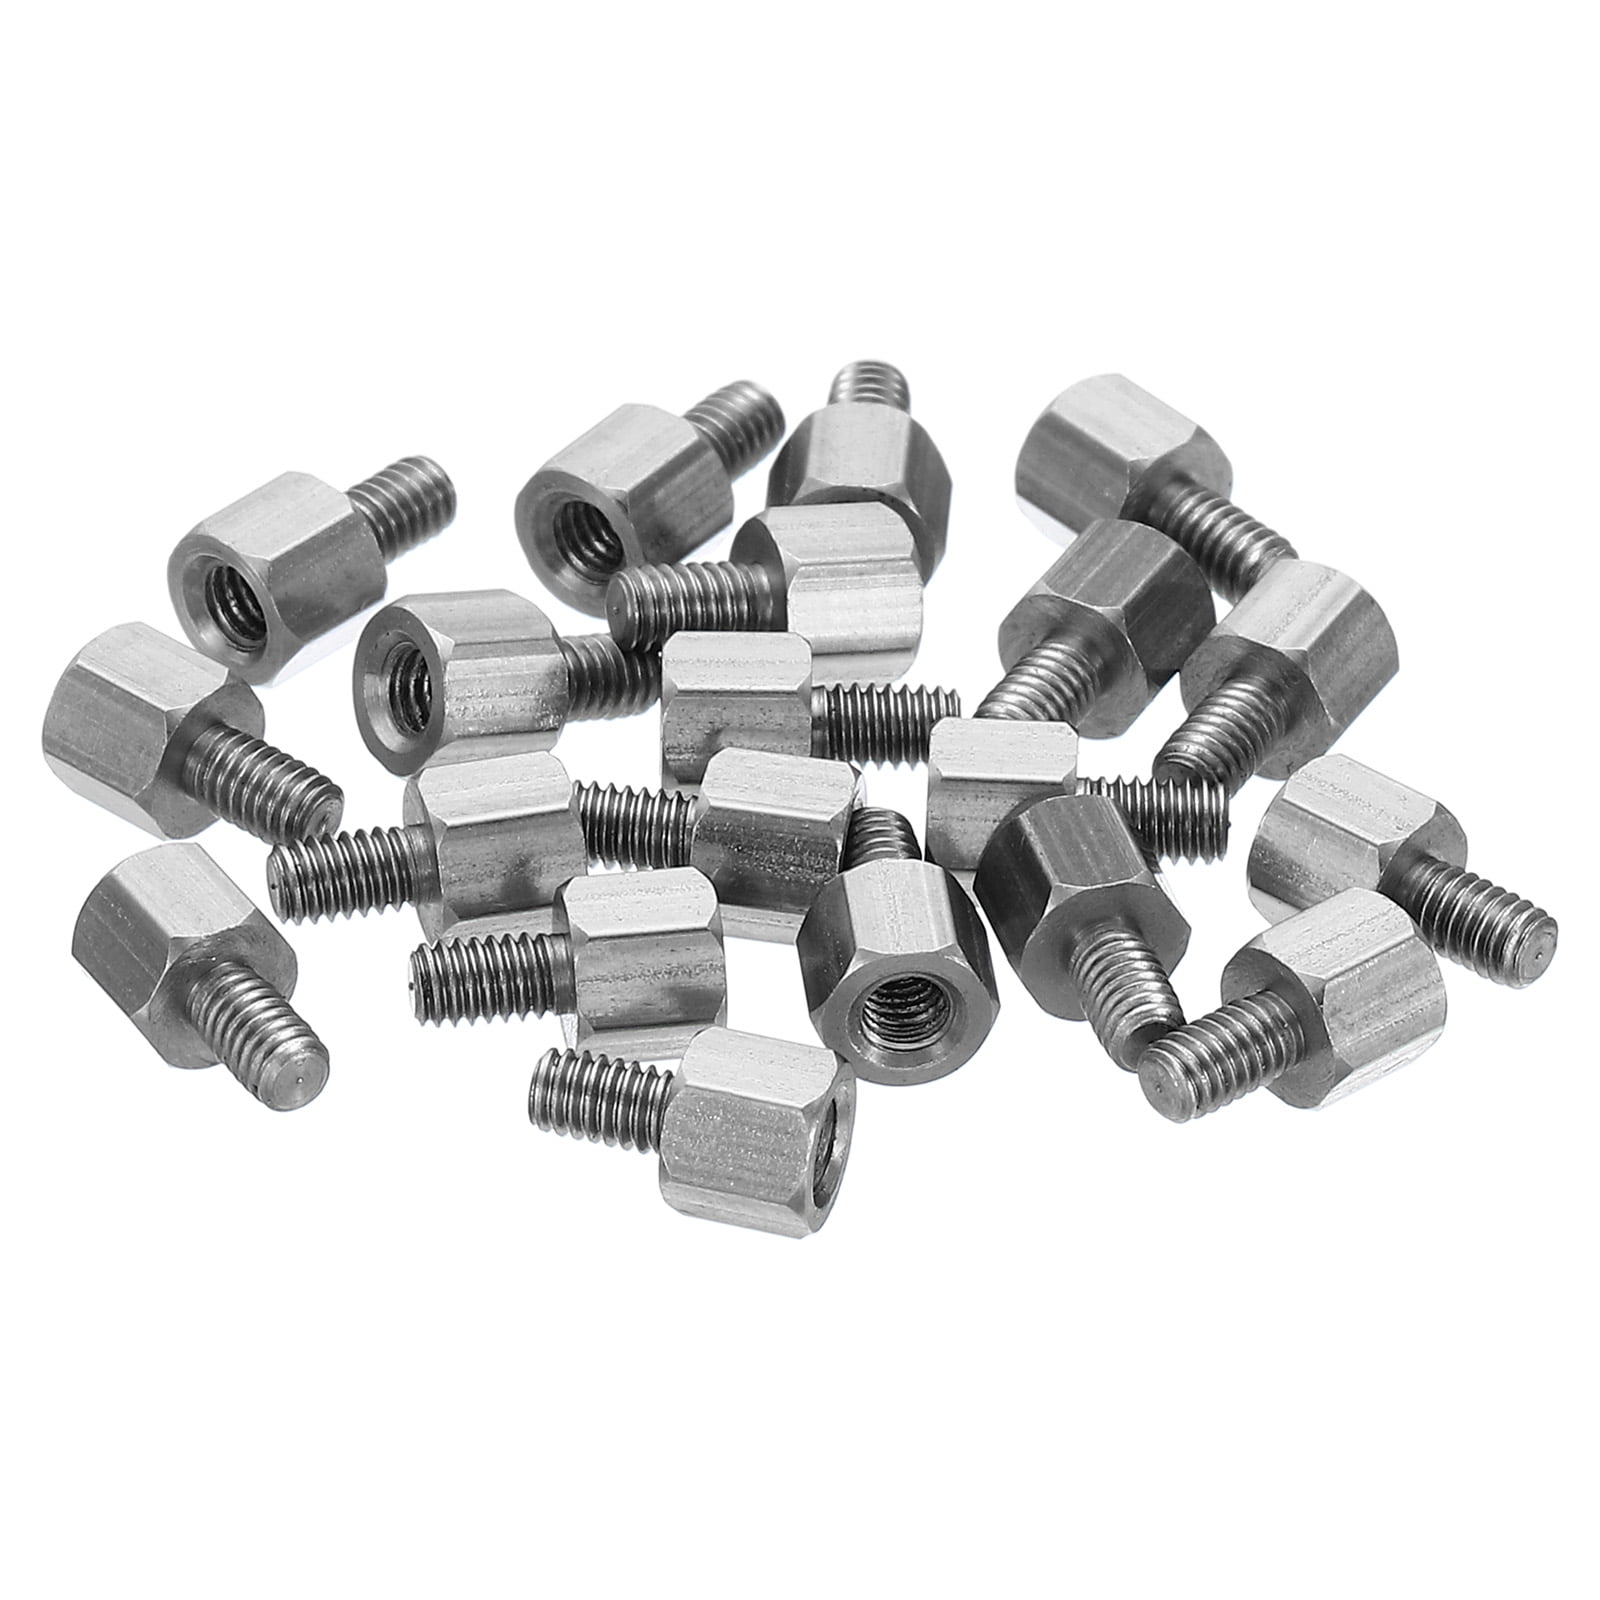 Uxcell M3x15mm+4mm Male-Female Hex Standoff Screws, Stainless Steel PCB  Standoffs for Motherboards, 20 Pack